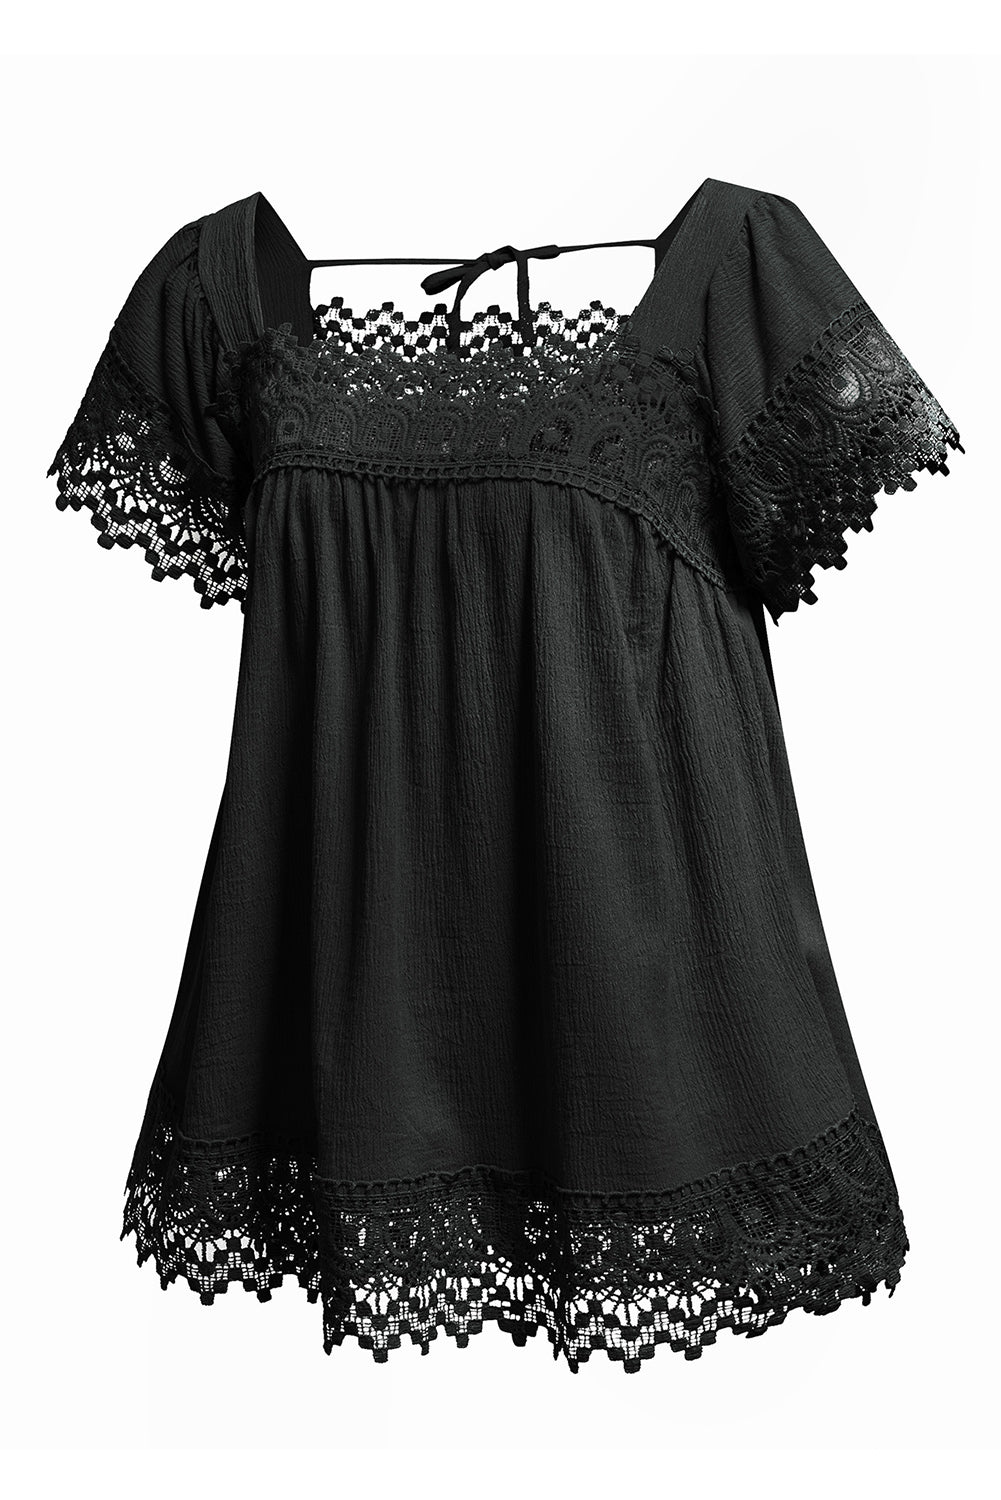 Black Womens Lace Top Pom Pom Splicing Square Neck Blouse LC25112089-2